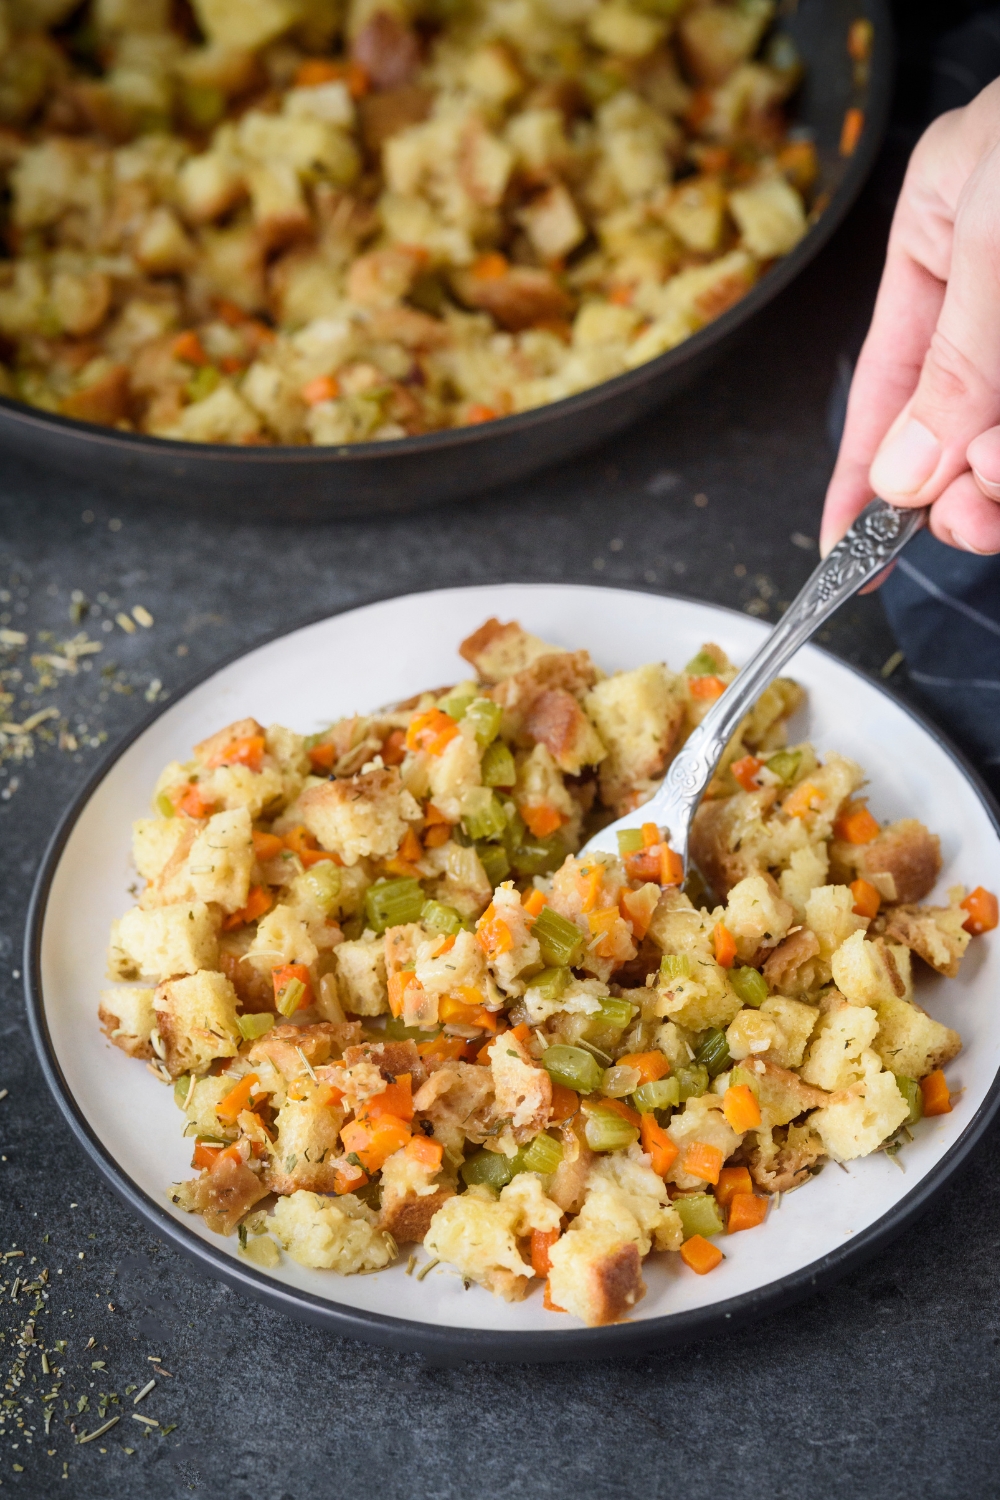 A plate of stovetop stuffing with diced celery and carrots mixed in with the stuffing. A fork is grabbing a bite of stuffing.